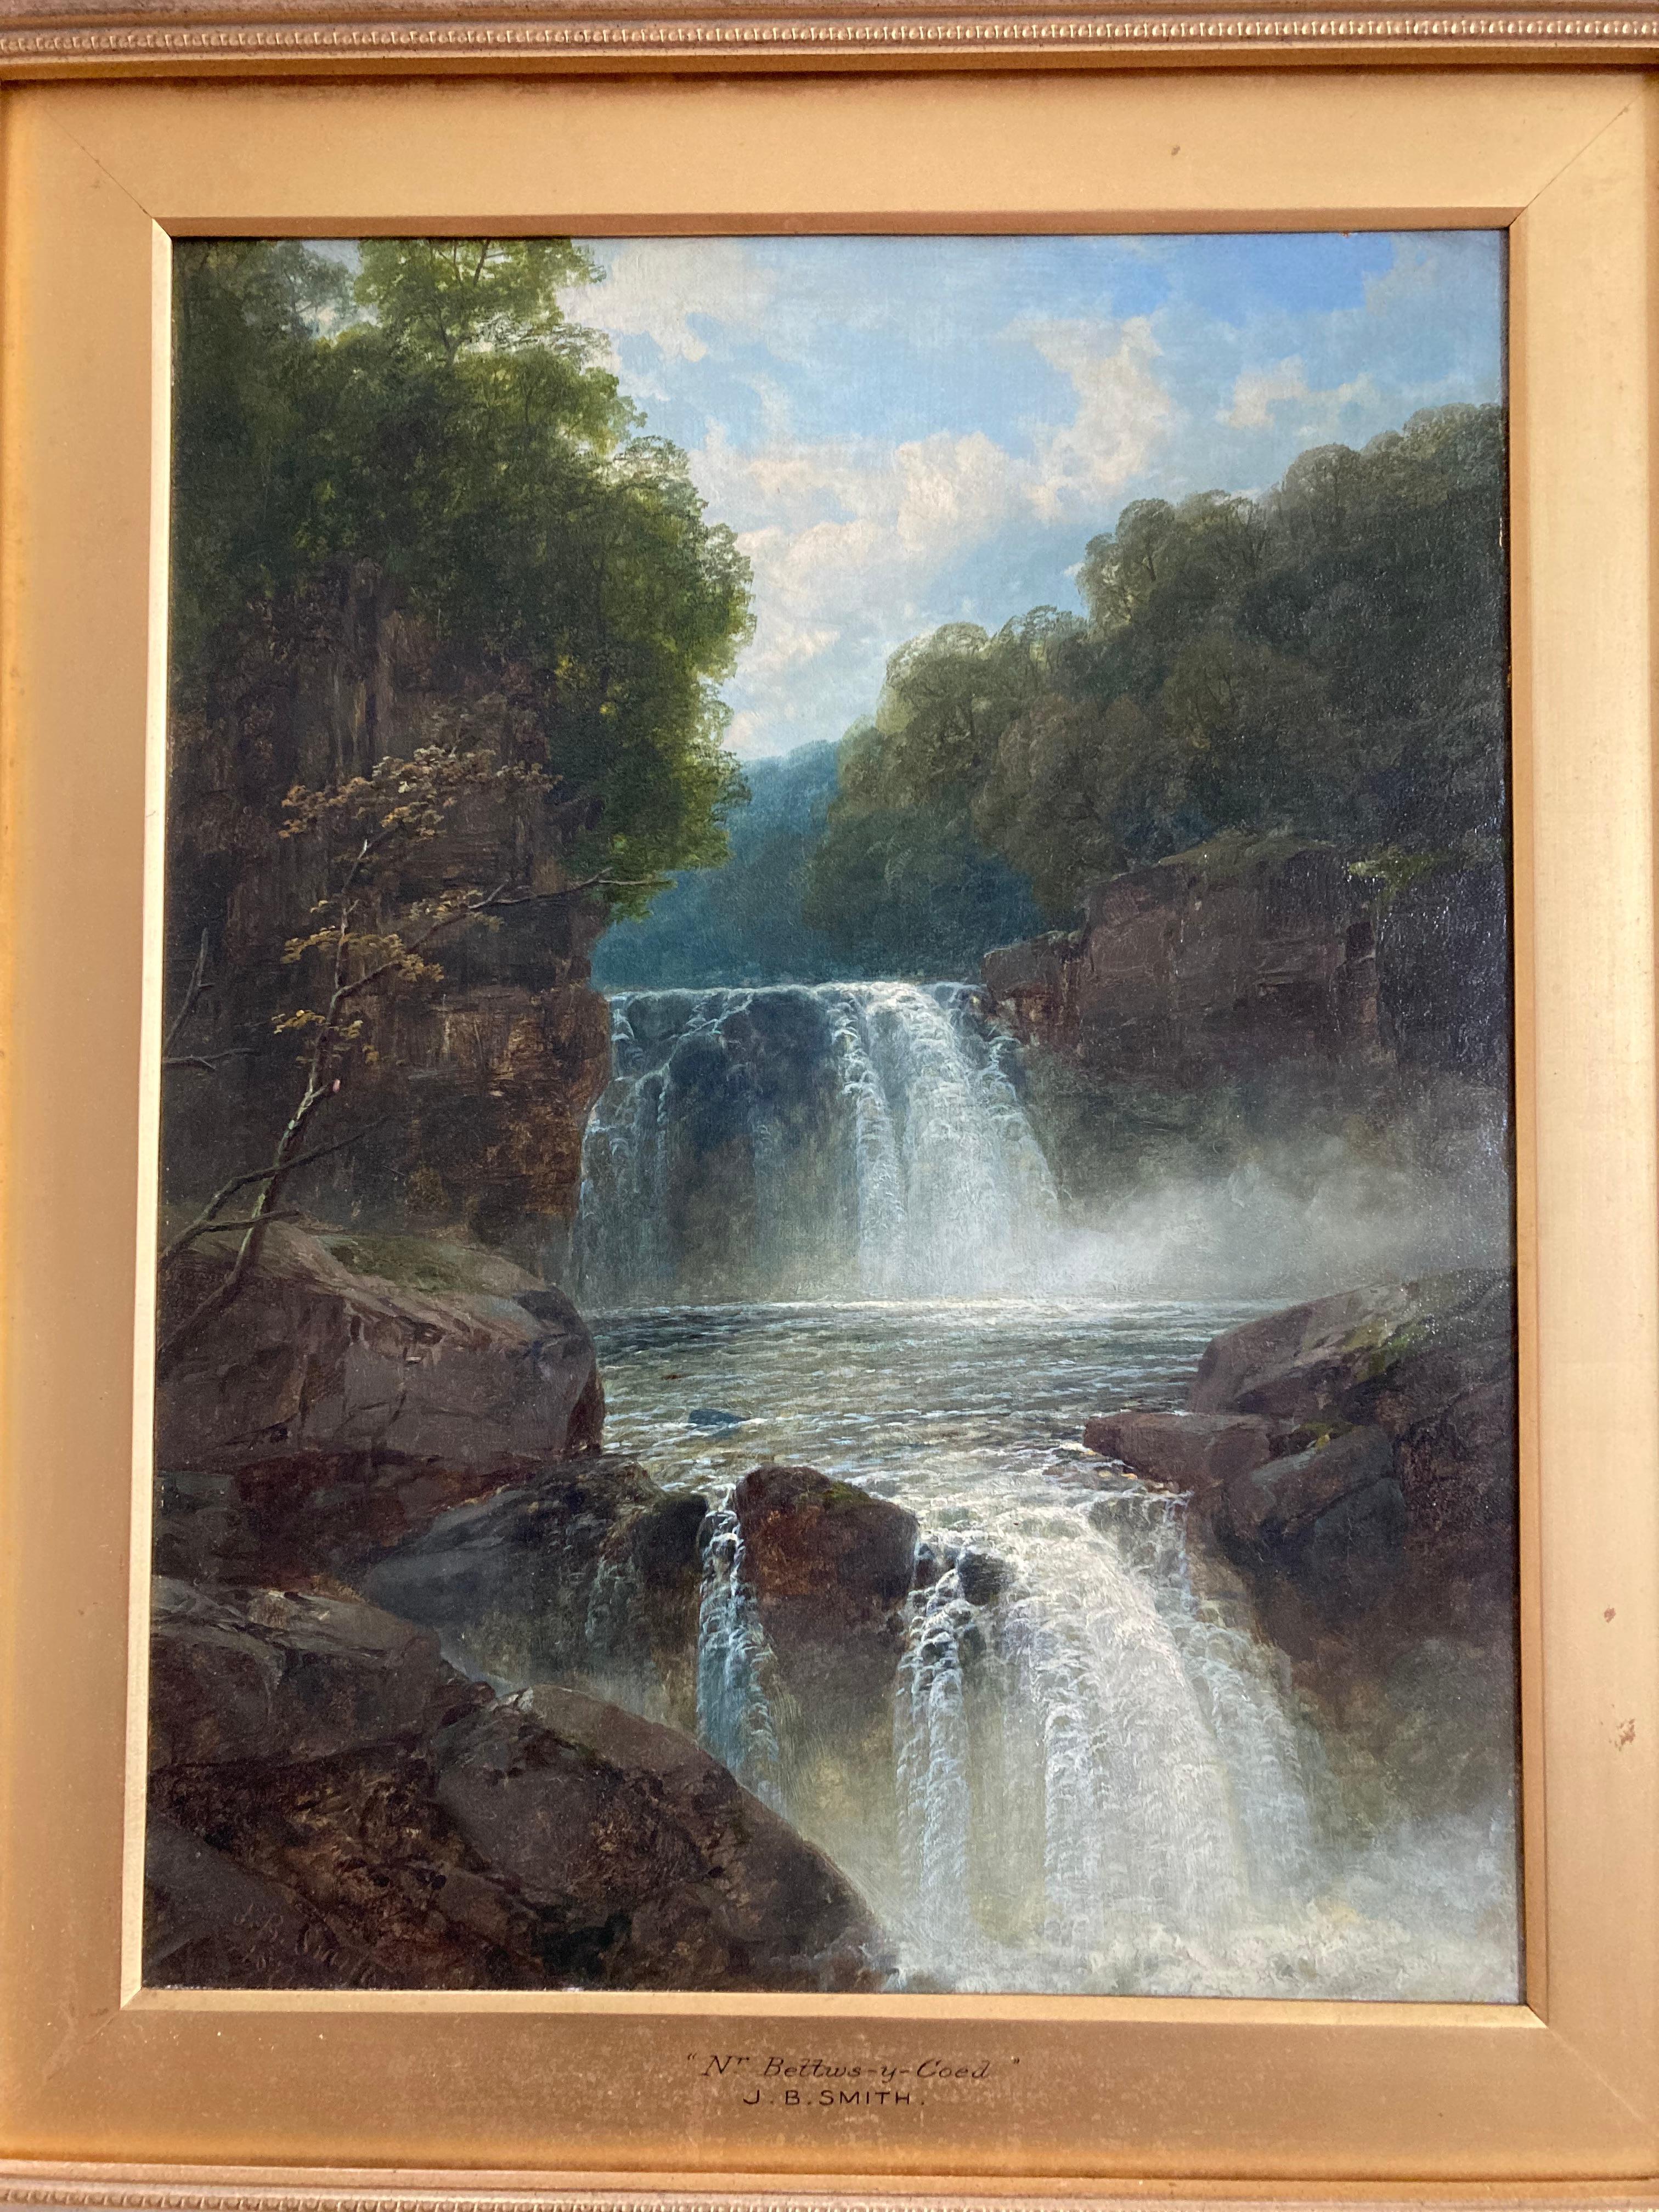 John Brandon Smith, Victorian view of Betwys-y-Coed waterfall, Wales 1